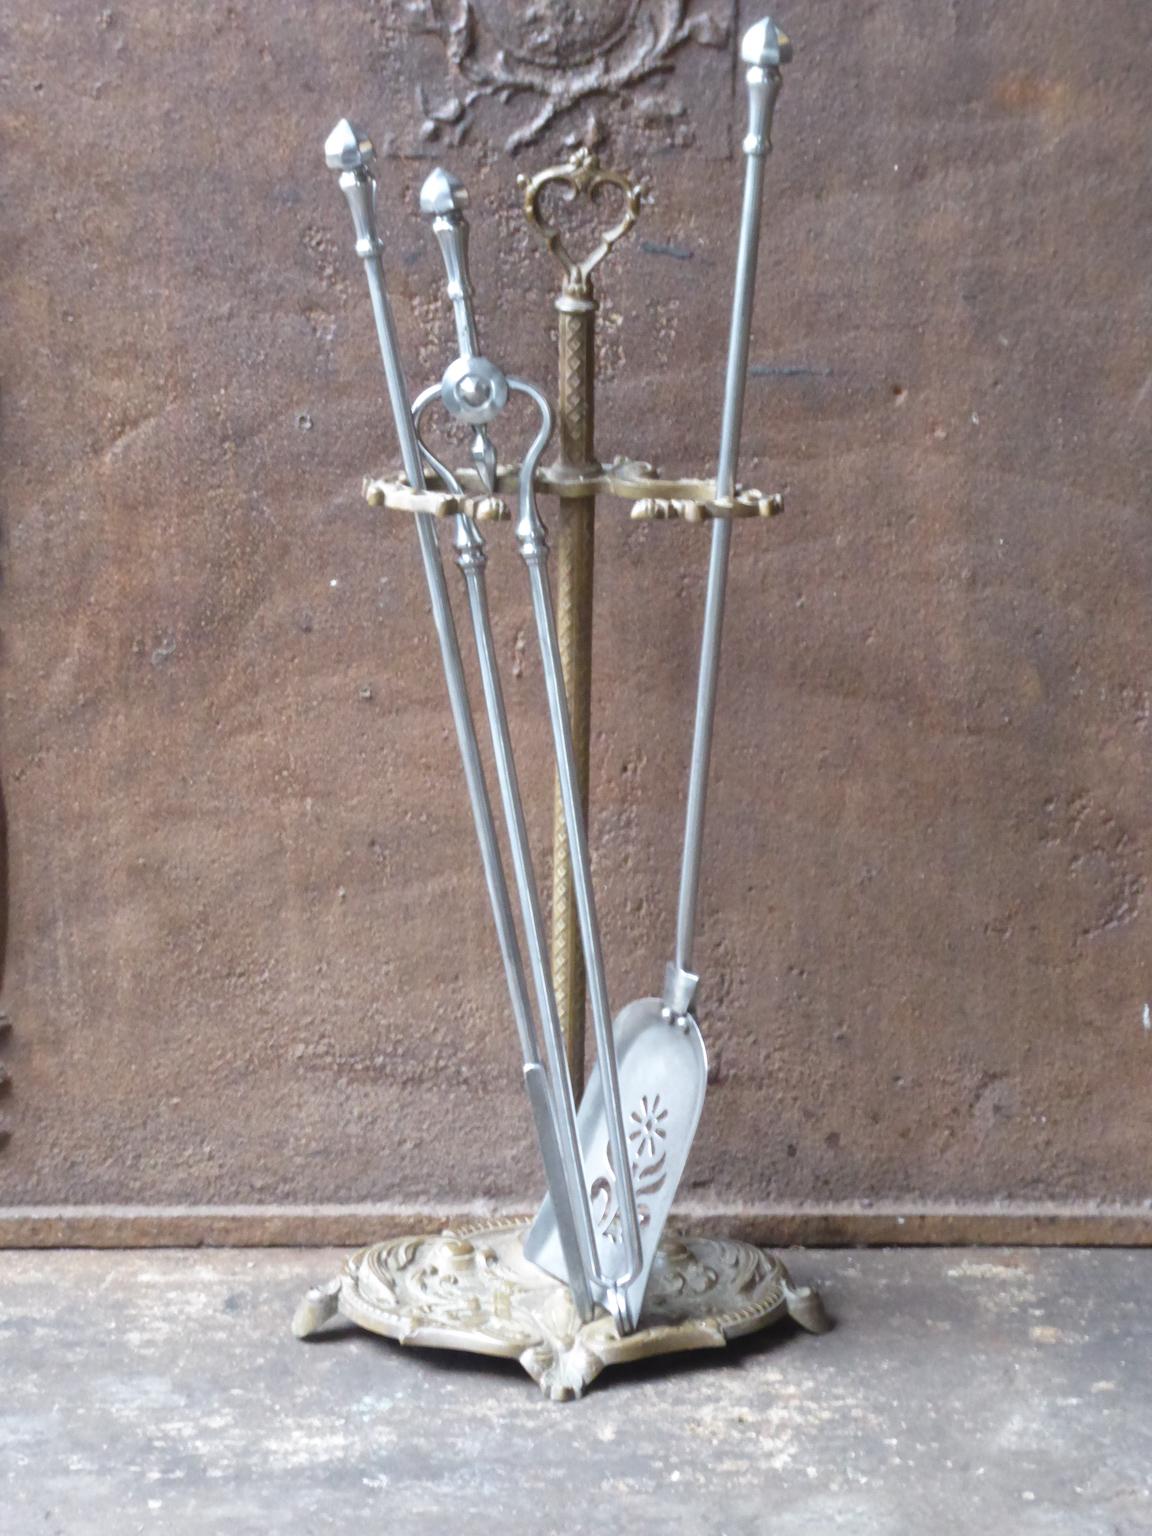 Beautiful 19th century English Victorian fireplace toolset made of brass and polished steel. The toolset consists of three tools and a stand. The condition is good.













 